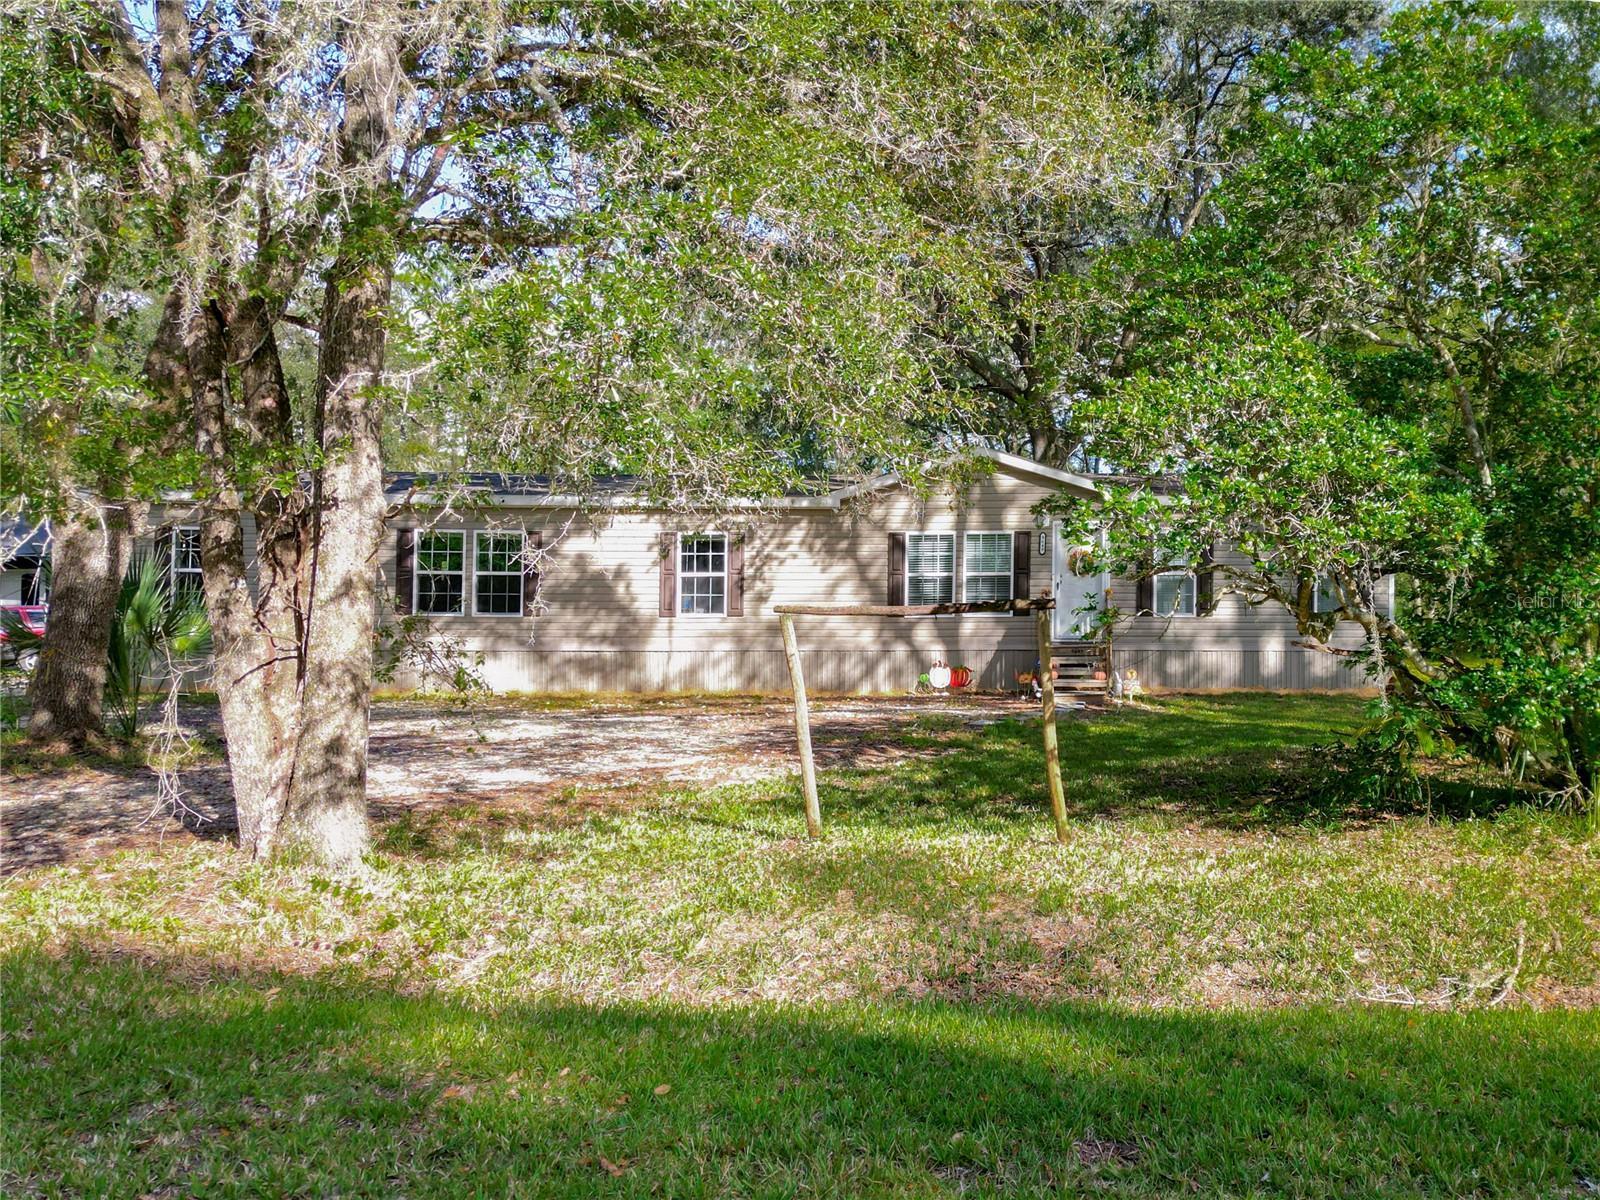 9649 91ST, FORT MC COY, Manufactured Home - Post 1977,  for sale, Melissa  Lebron, Ocala Realty World - Selling All of Florida